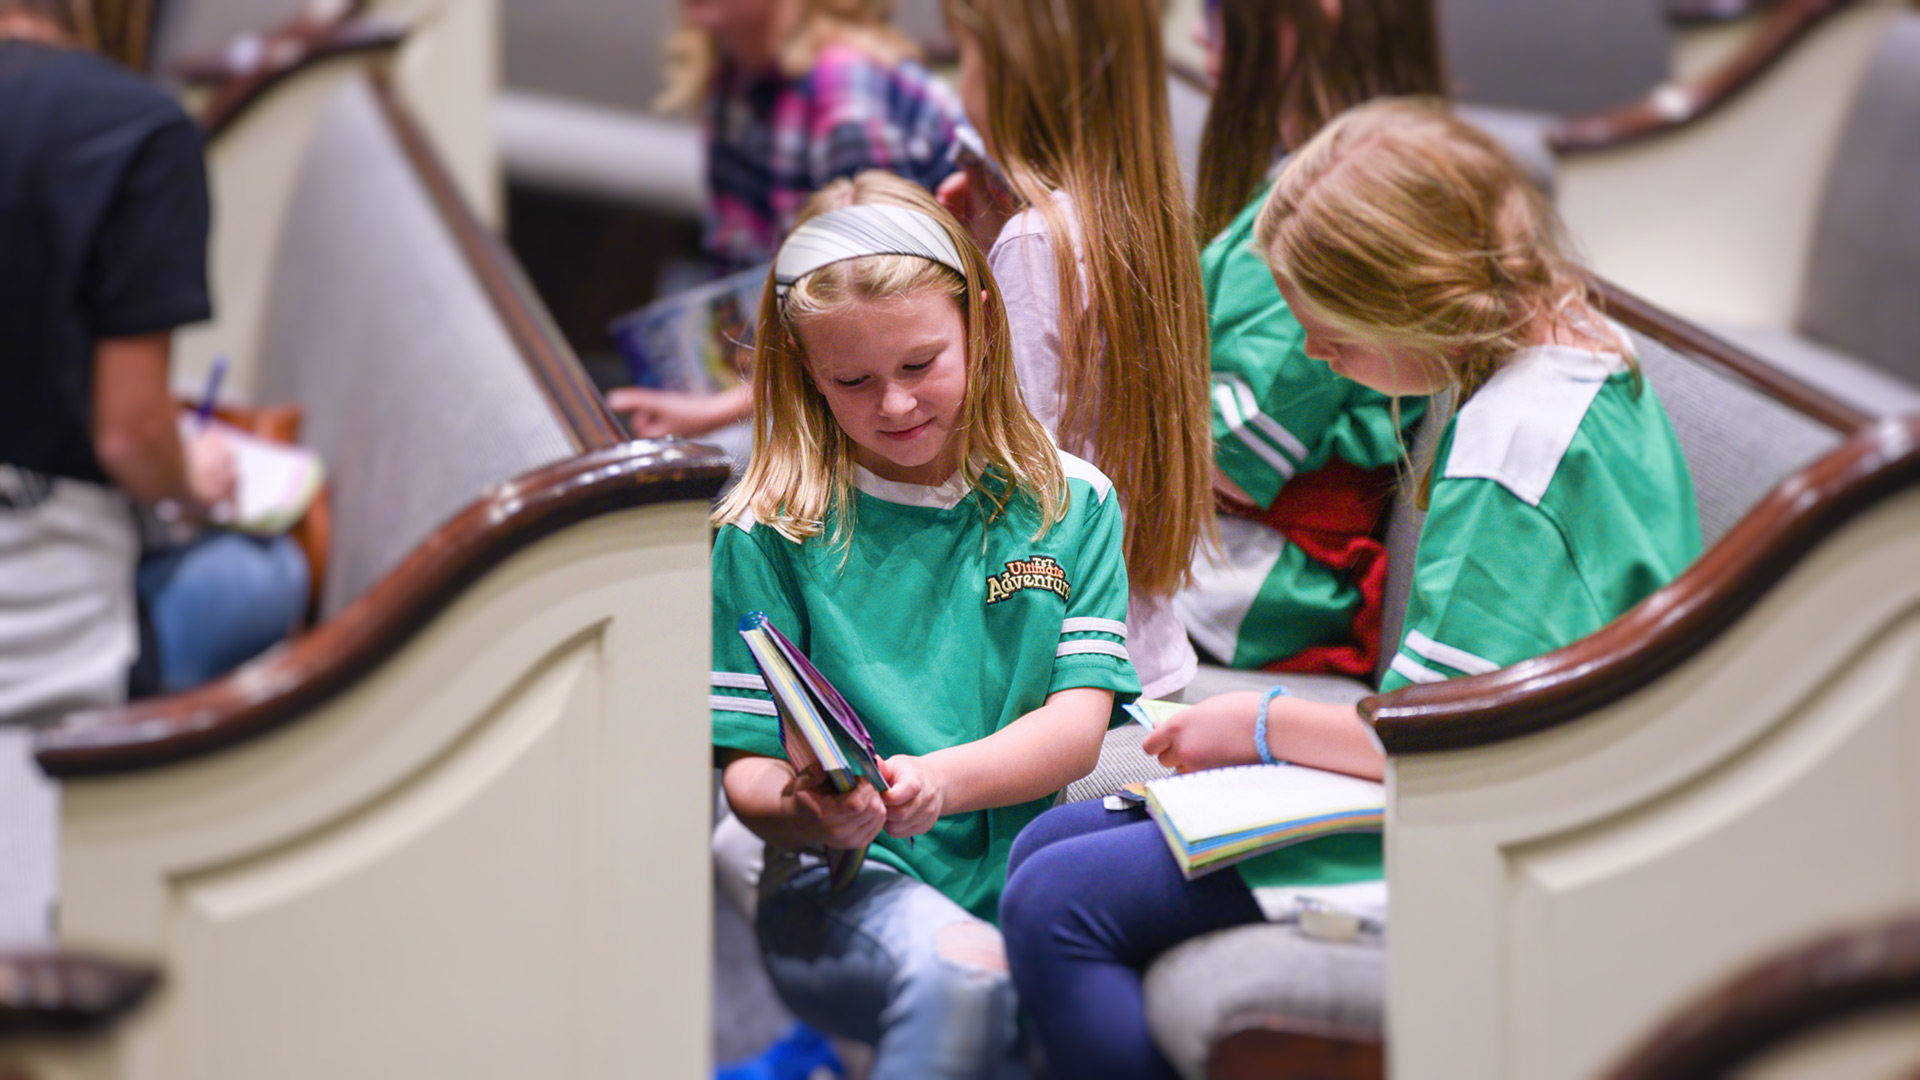 Girls working on their memory verses together at Awana.